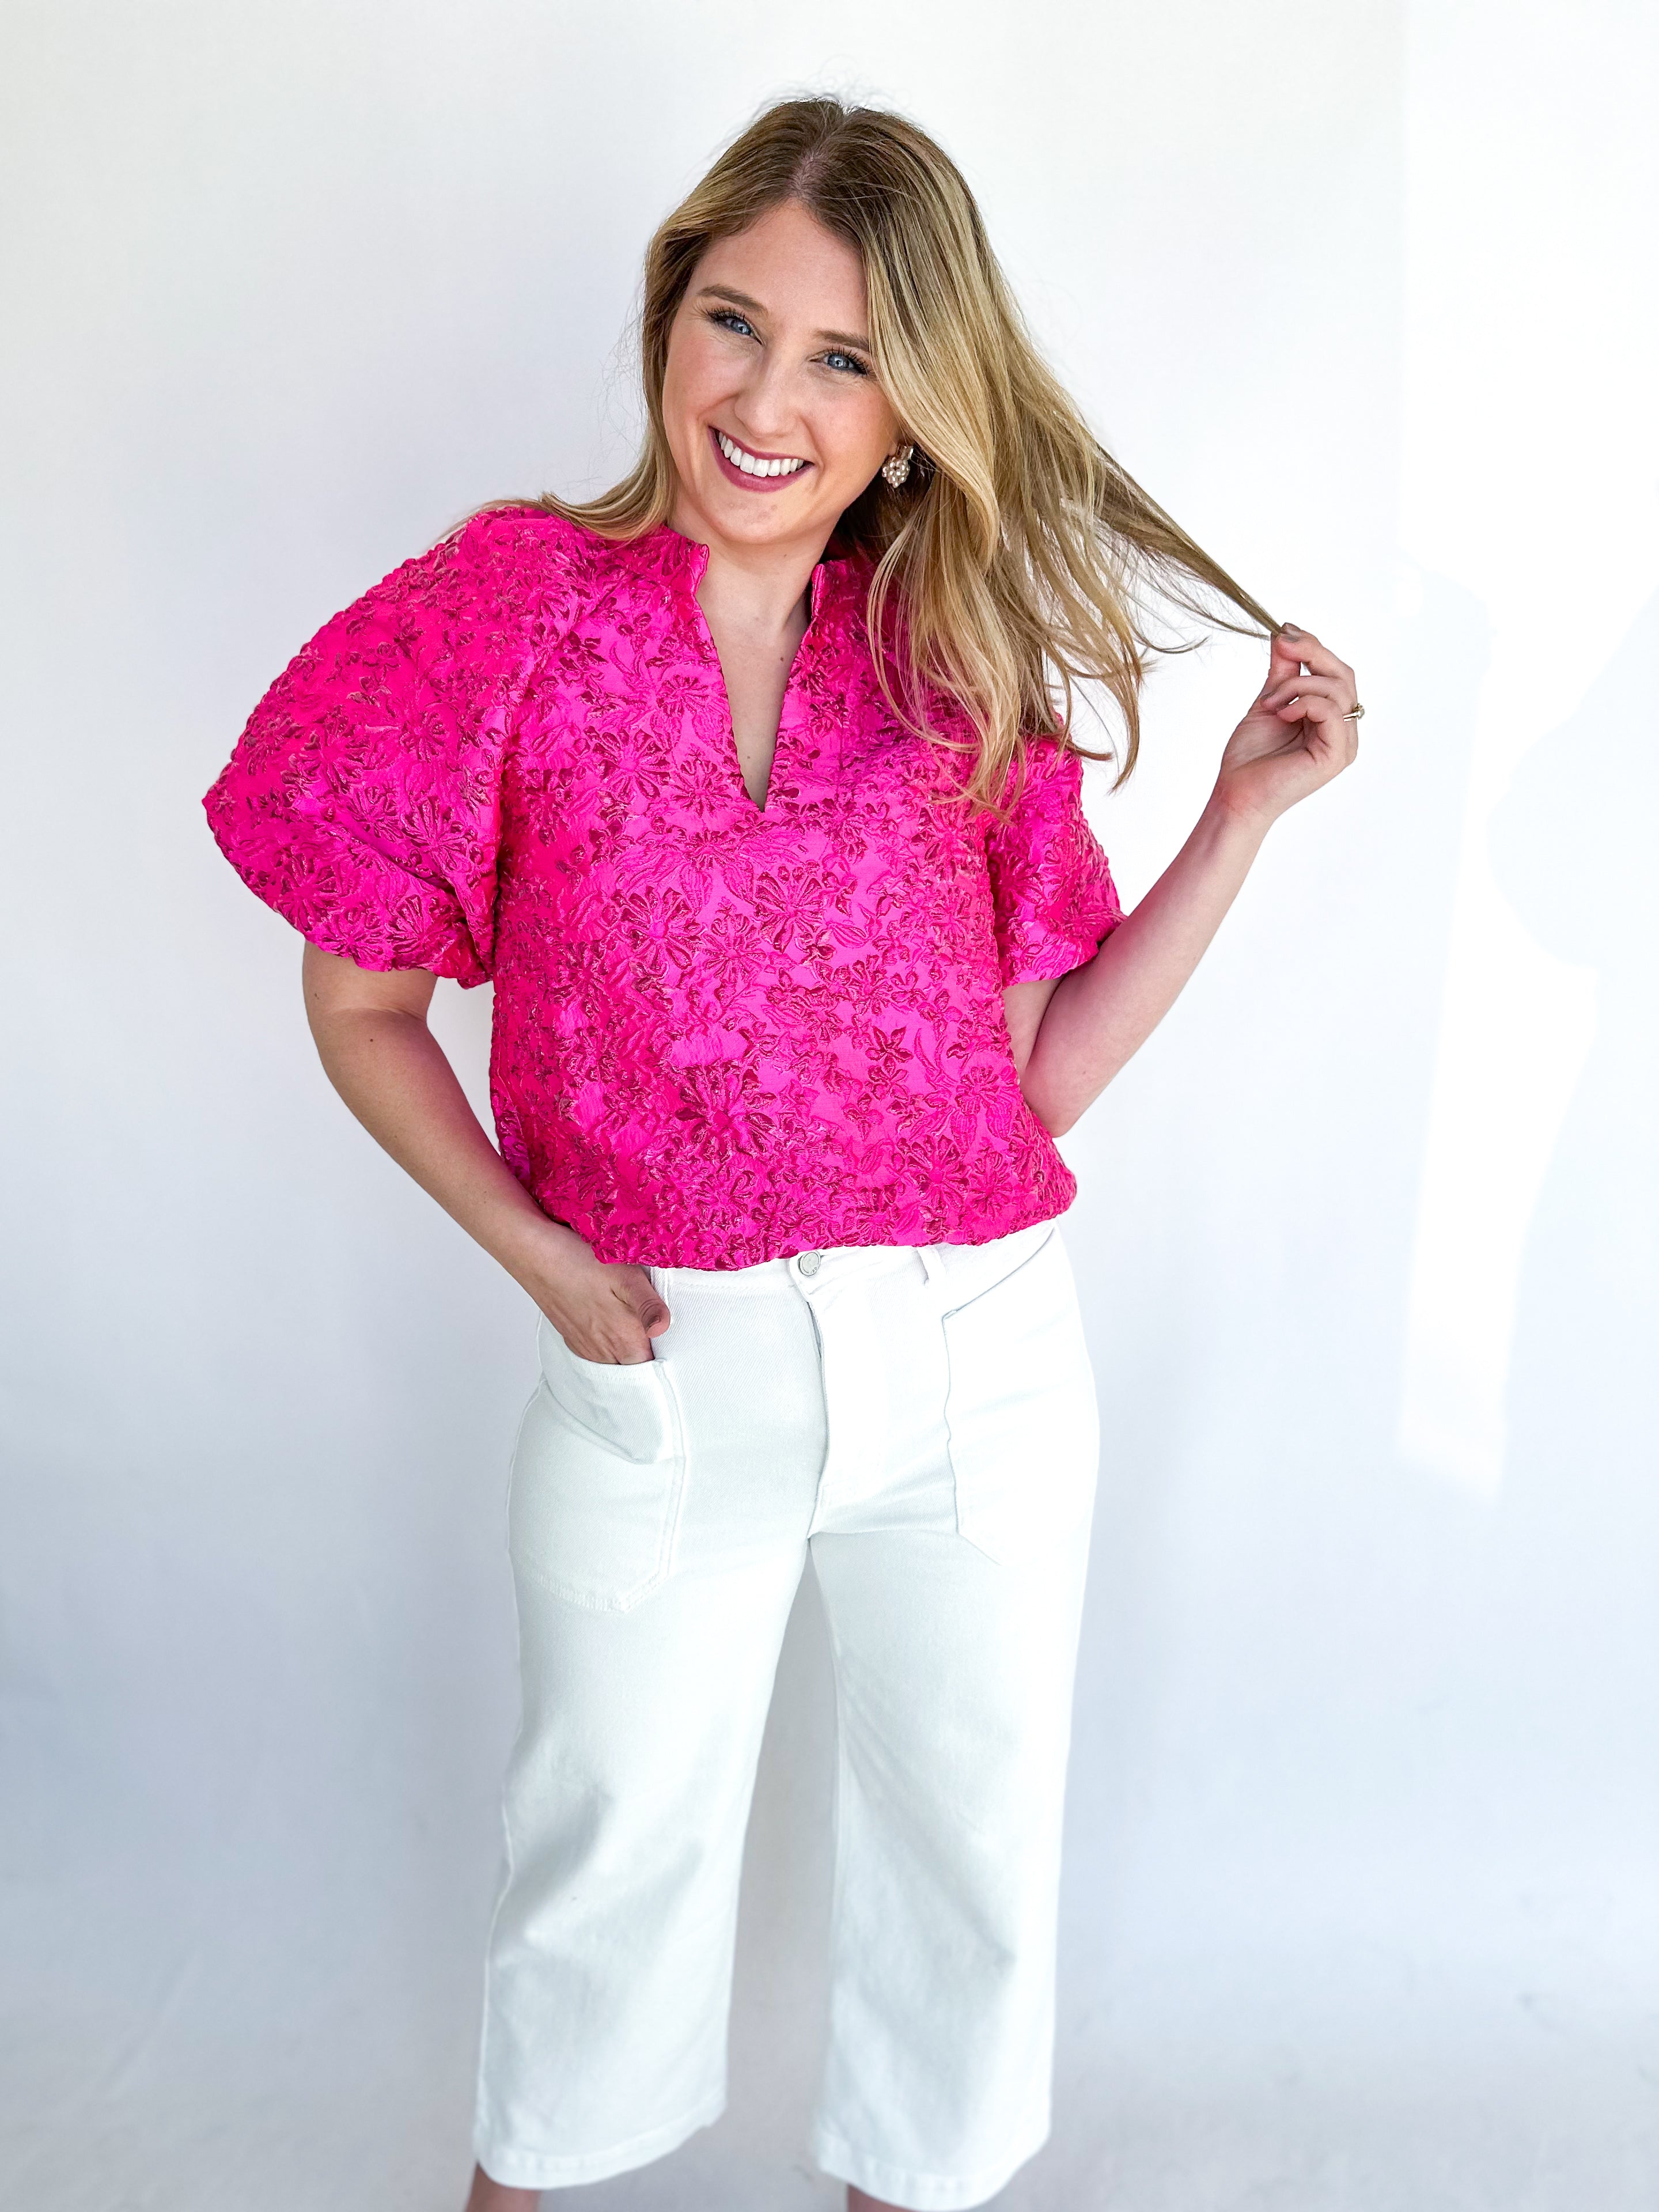 Pink Party Blouse - THML-200 Fashion Blouses-THML-July & June Women's Fashion Boutique Located in San Antonio, Texas